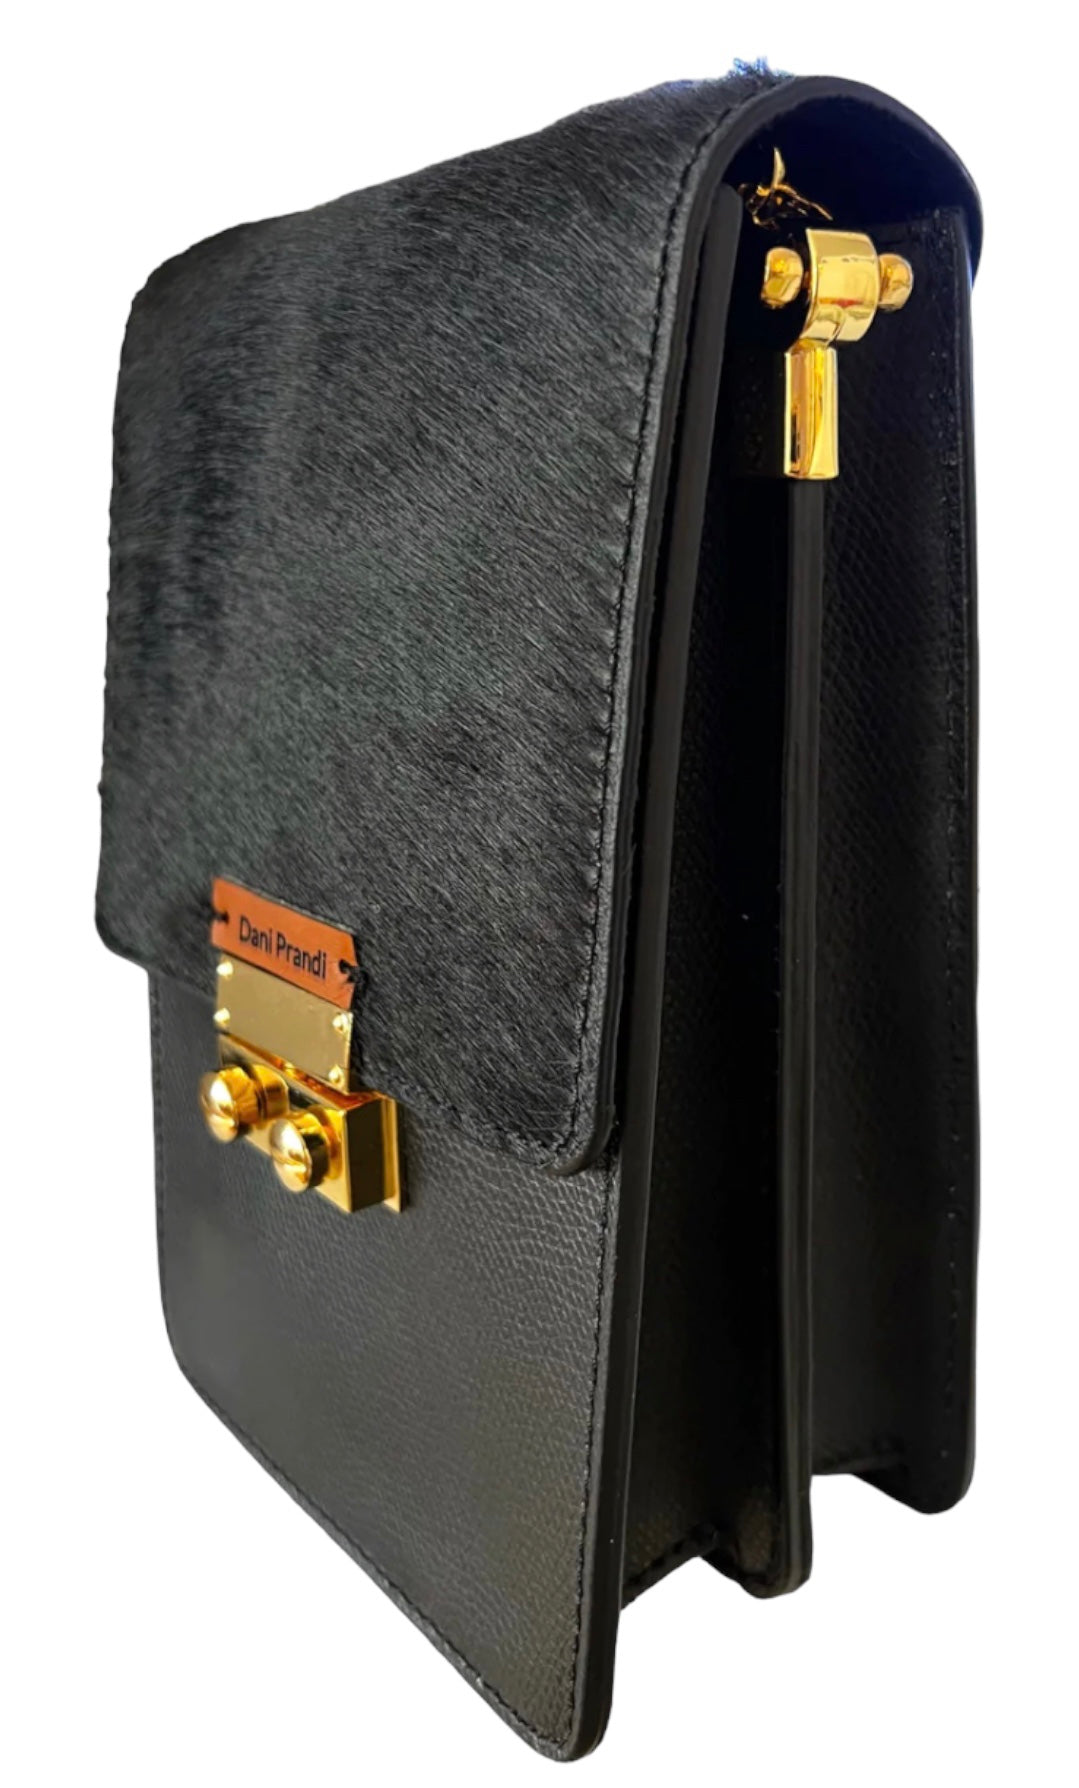 Elegant Evening Bag in black, crafted from real leather and adorned with calf hair for a touch of luxury. The bag showcases timeless sophistication, with a secure button closure and a golden shoulder strap adding a glamorous touch. The dual compartments inside offer practical organization for essentials, making it perfect for important evenings